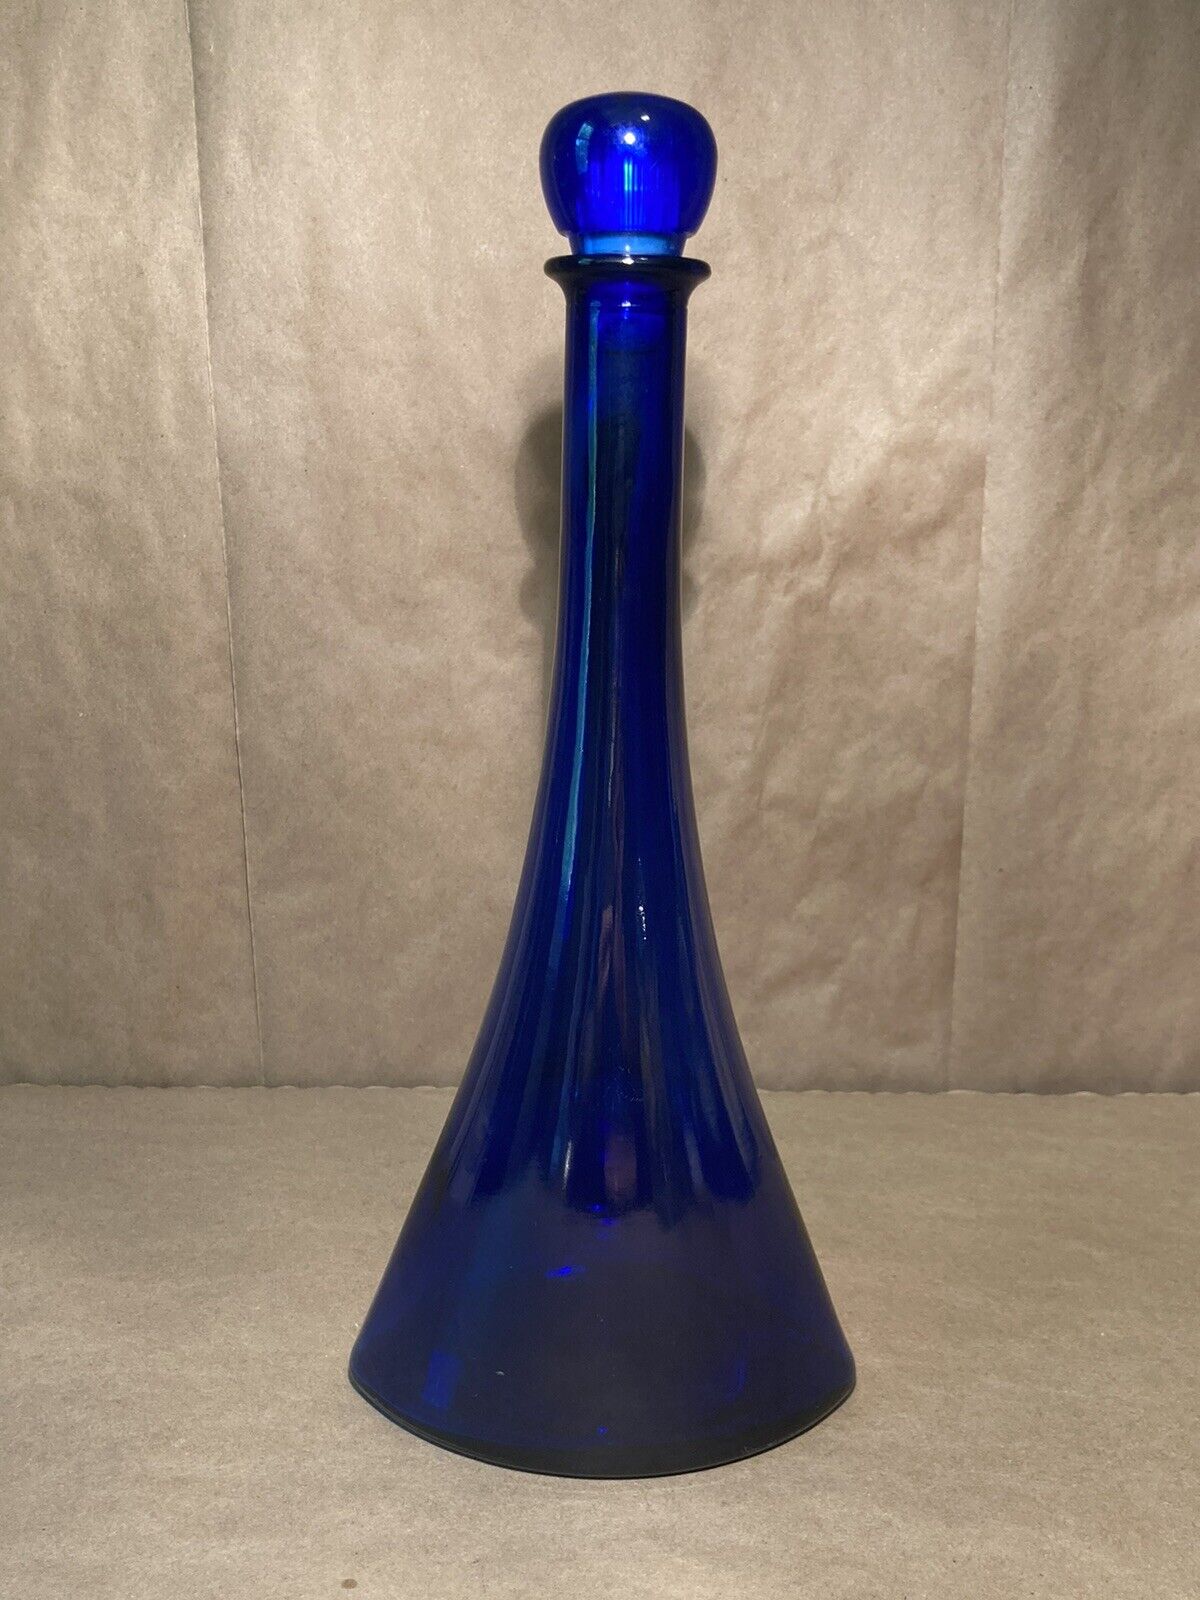 Vintage Cobalt Blue Mid Century Modern Genie Style Decanter With Stopper